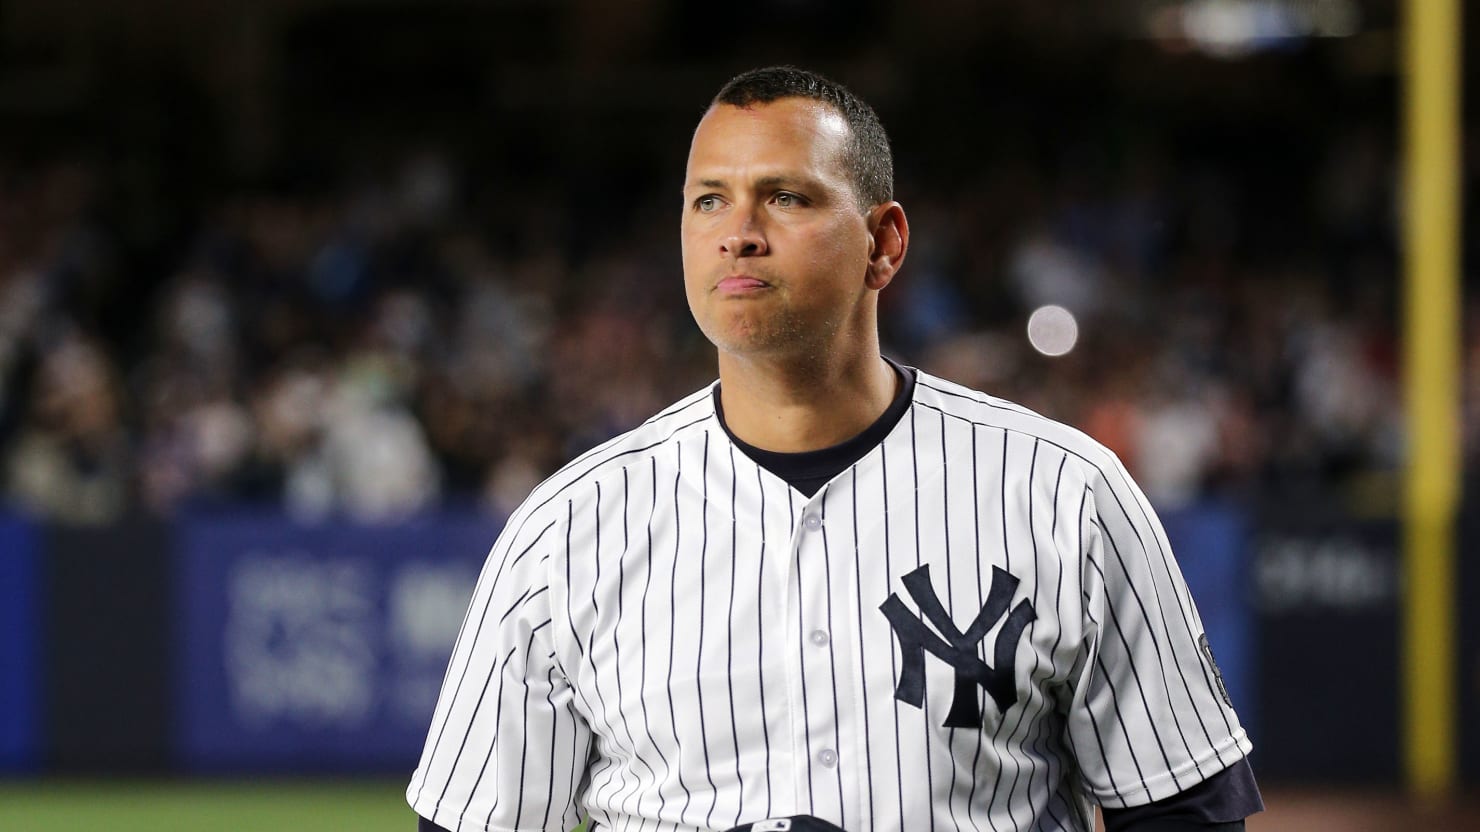 Alex Rodriguez's car was robbed shortly after Sunday Night